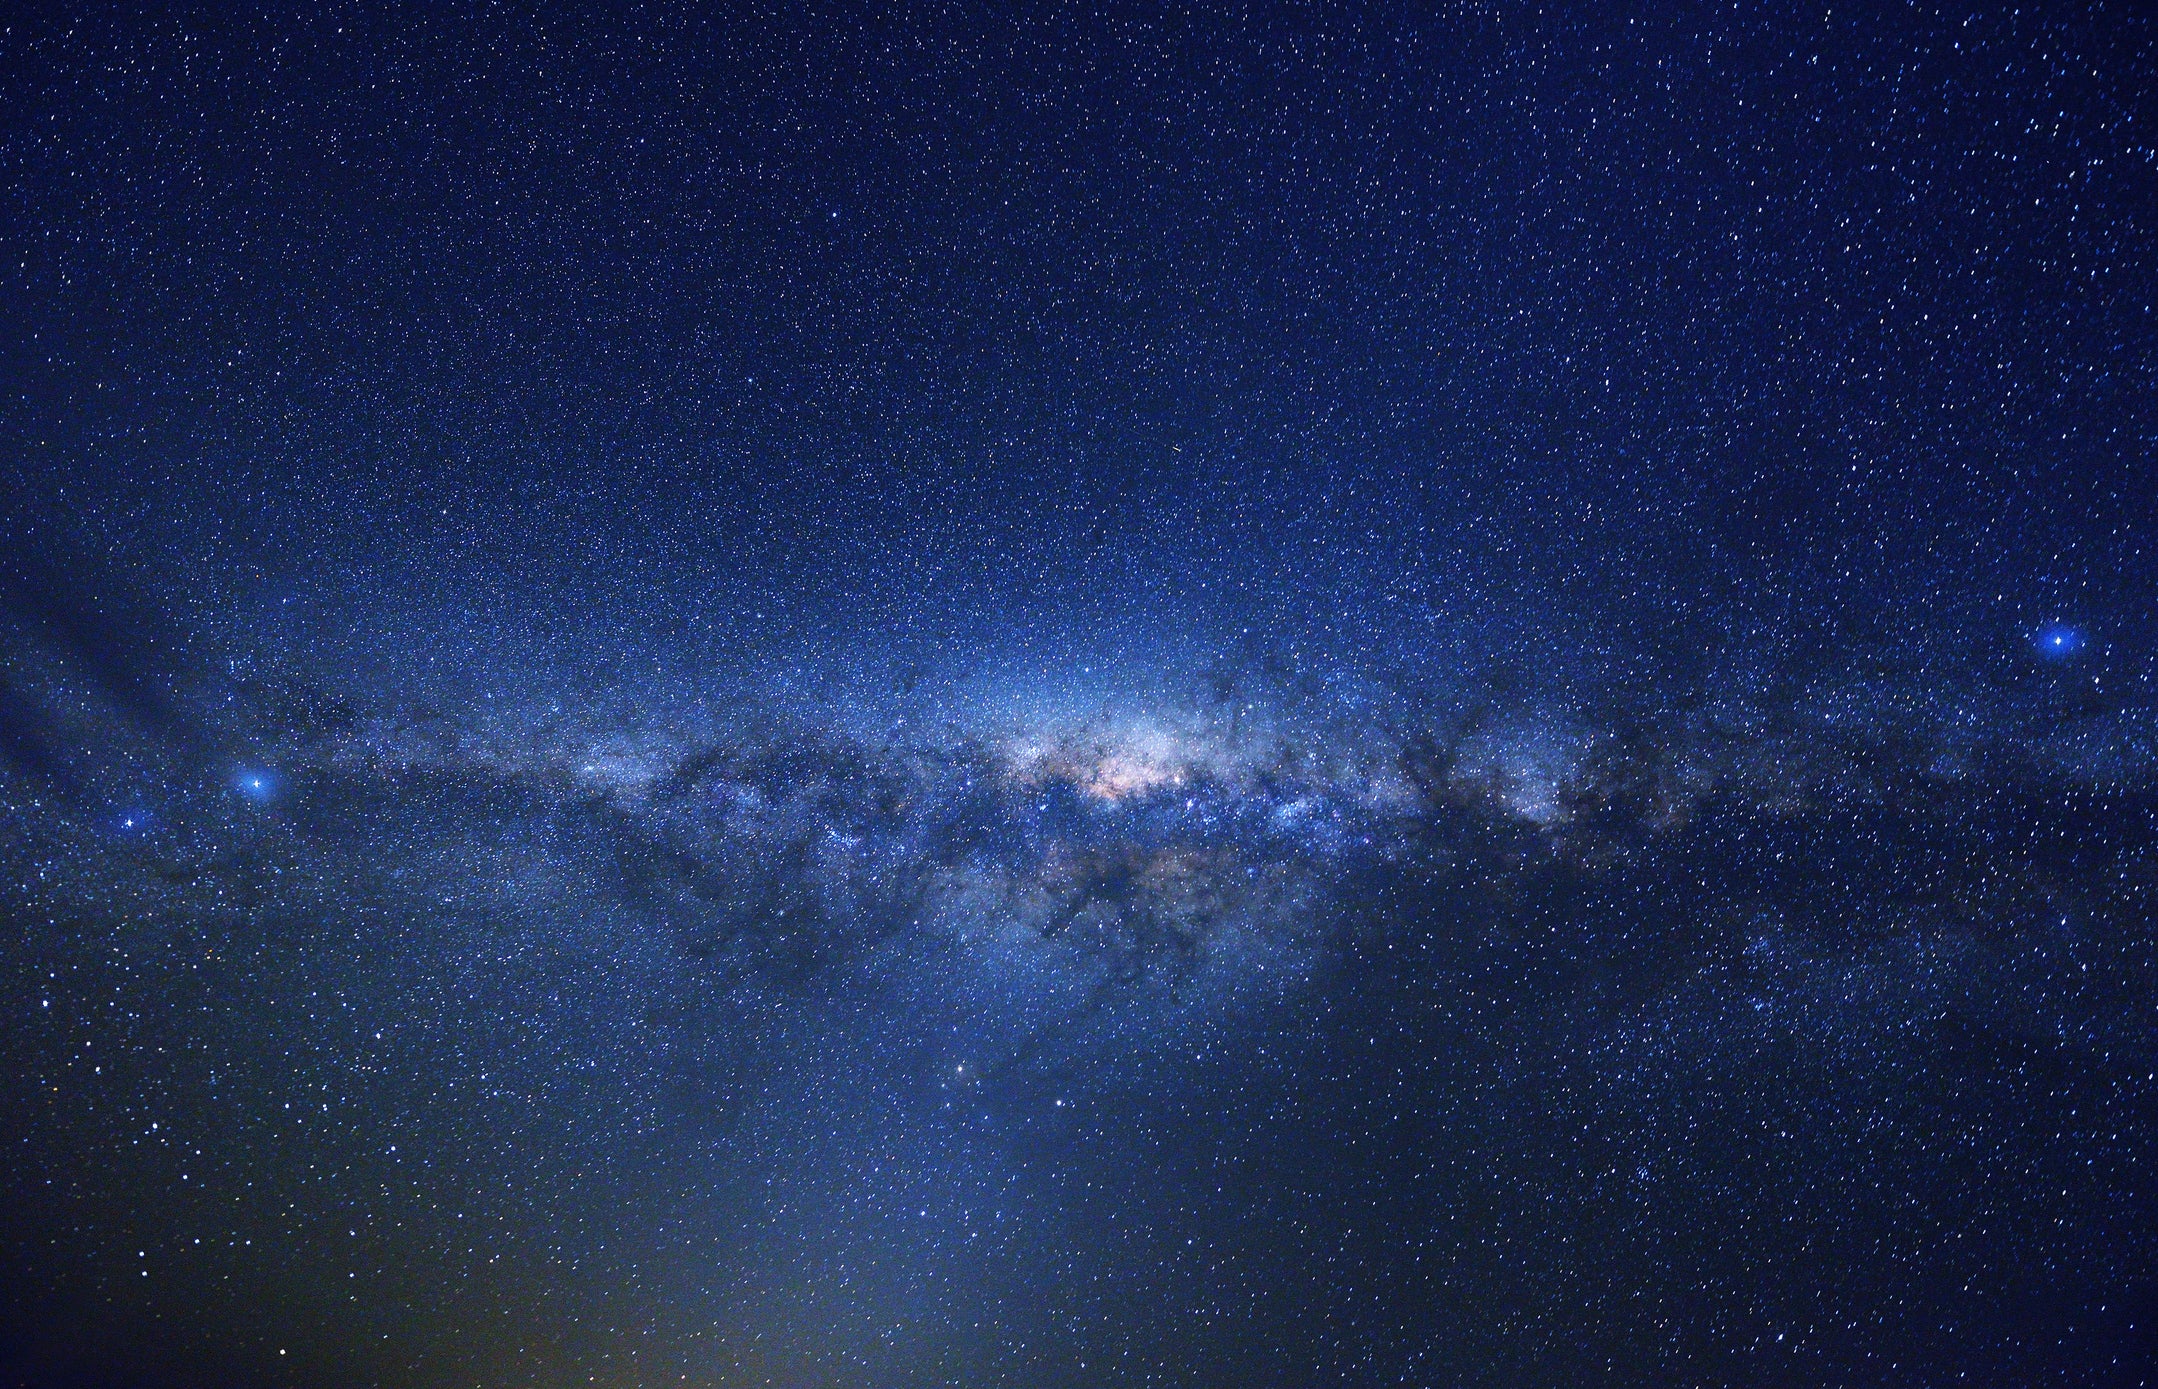 Milky Way in the midnight sky, seen from the southern hemisphere